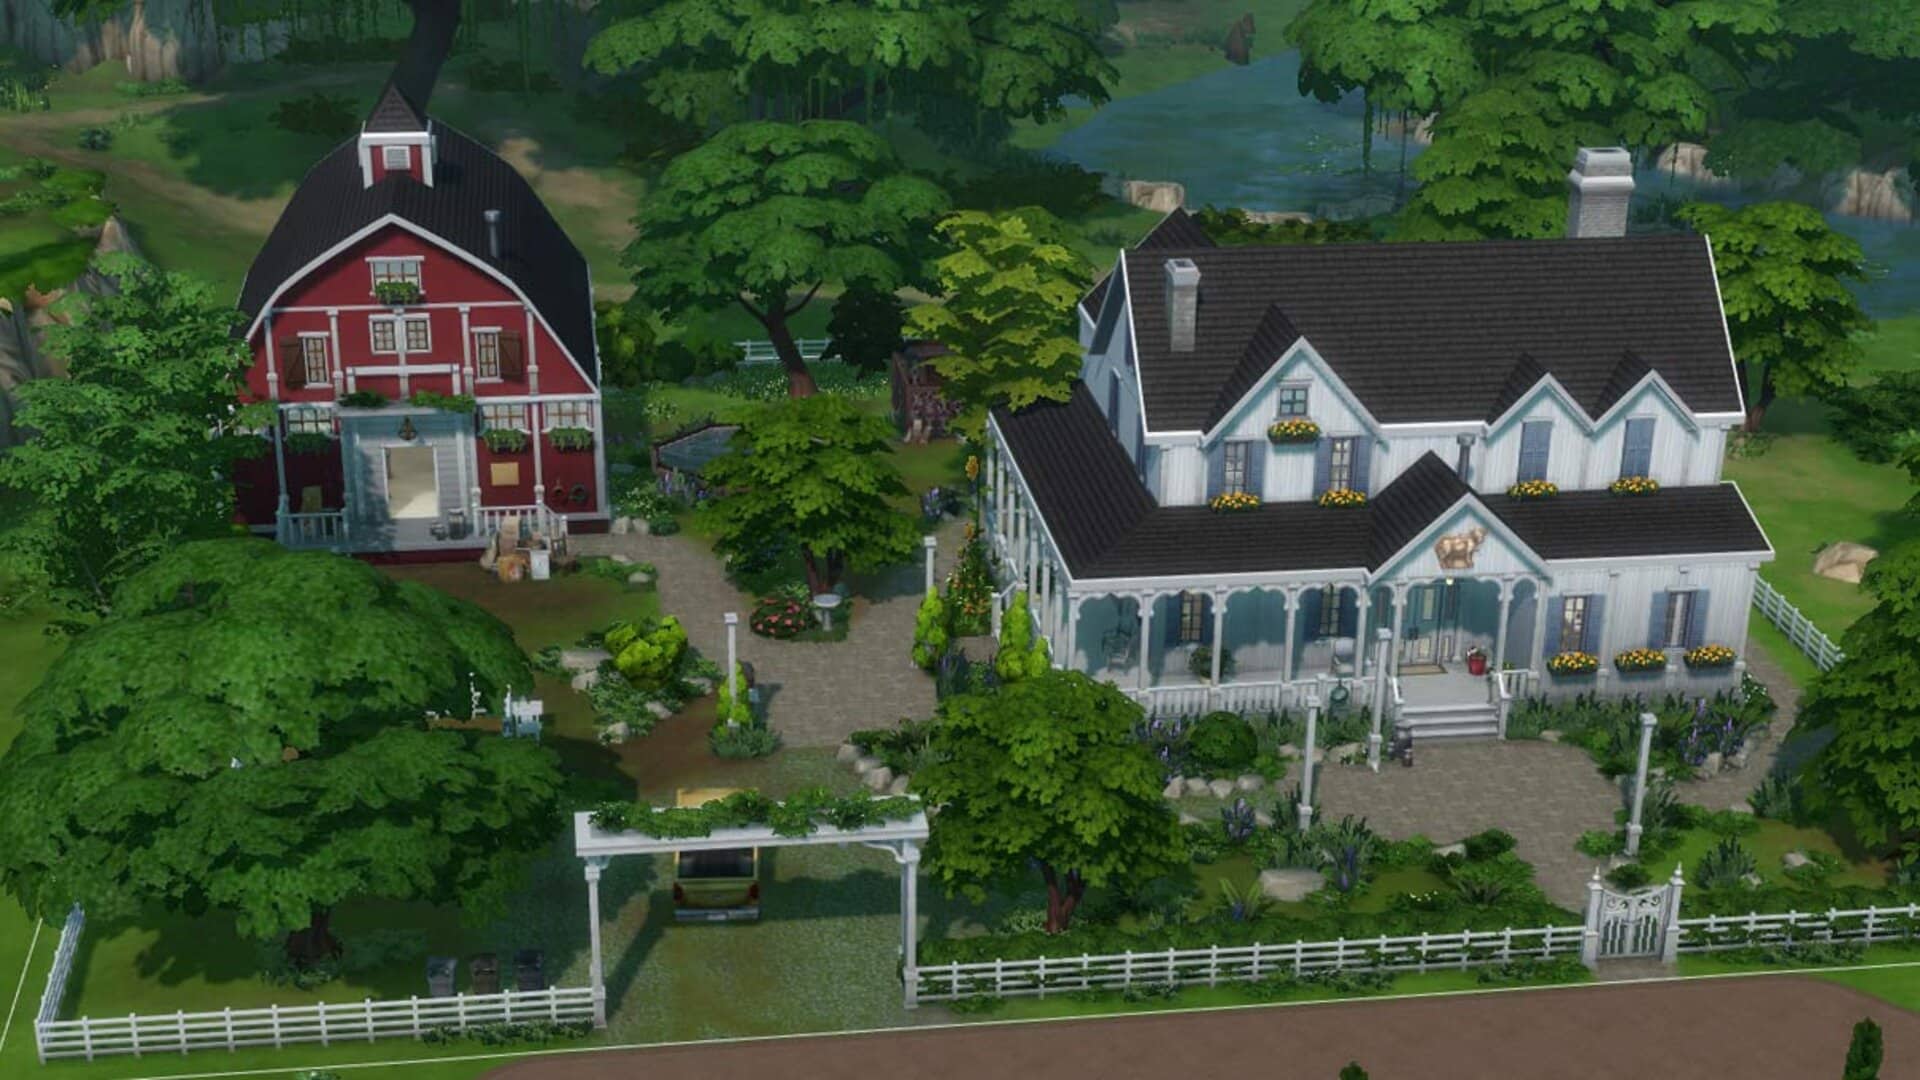 How to Move Houses in The Sims 4 featured image